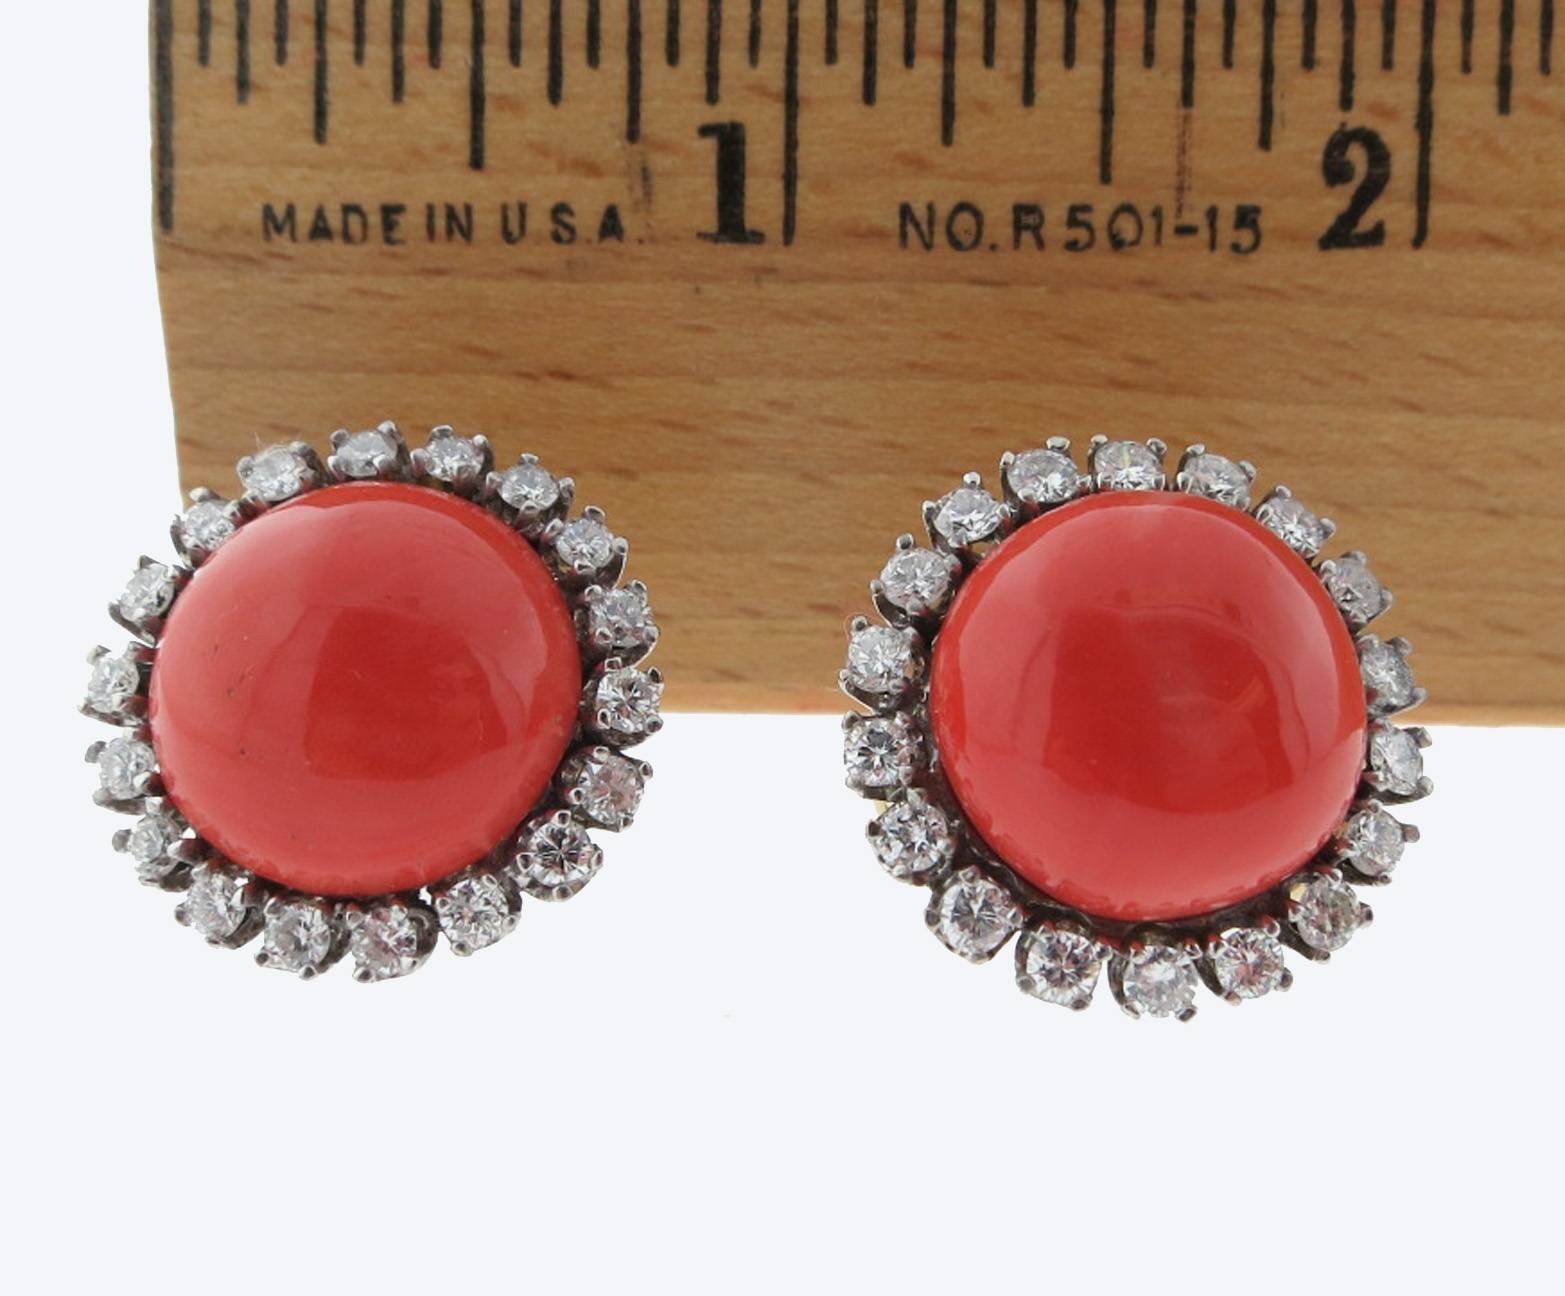 Classic natural coral button earrings surrounded with diamonds. Each earring measures approx .75 inches and is set with a coral cabochon measures approx 12.5mm. surrounded with 18 round brilliant cut diamonds in platinum. Total diamond weight approx